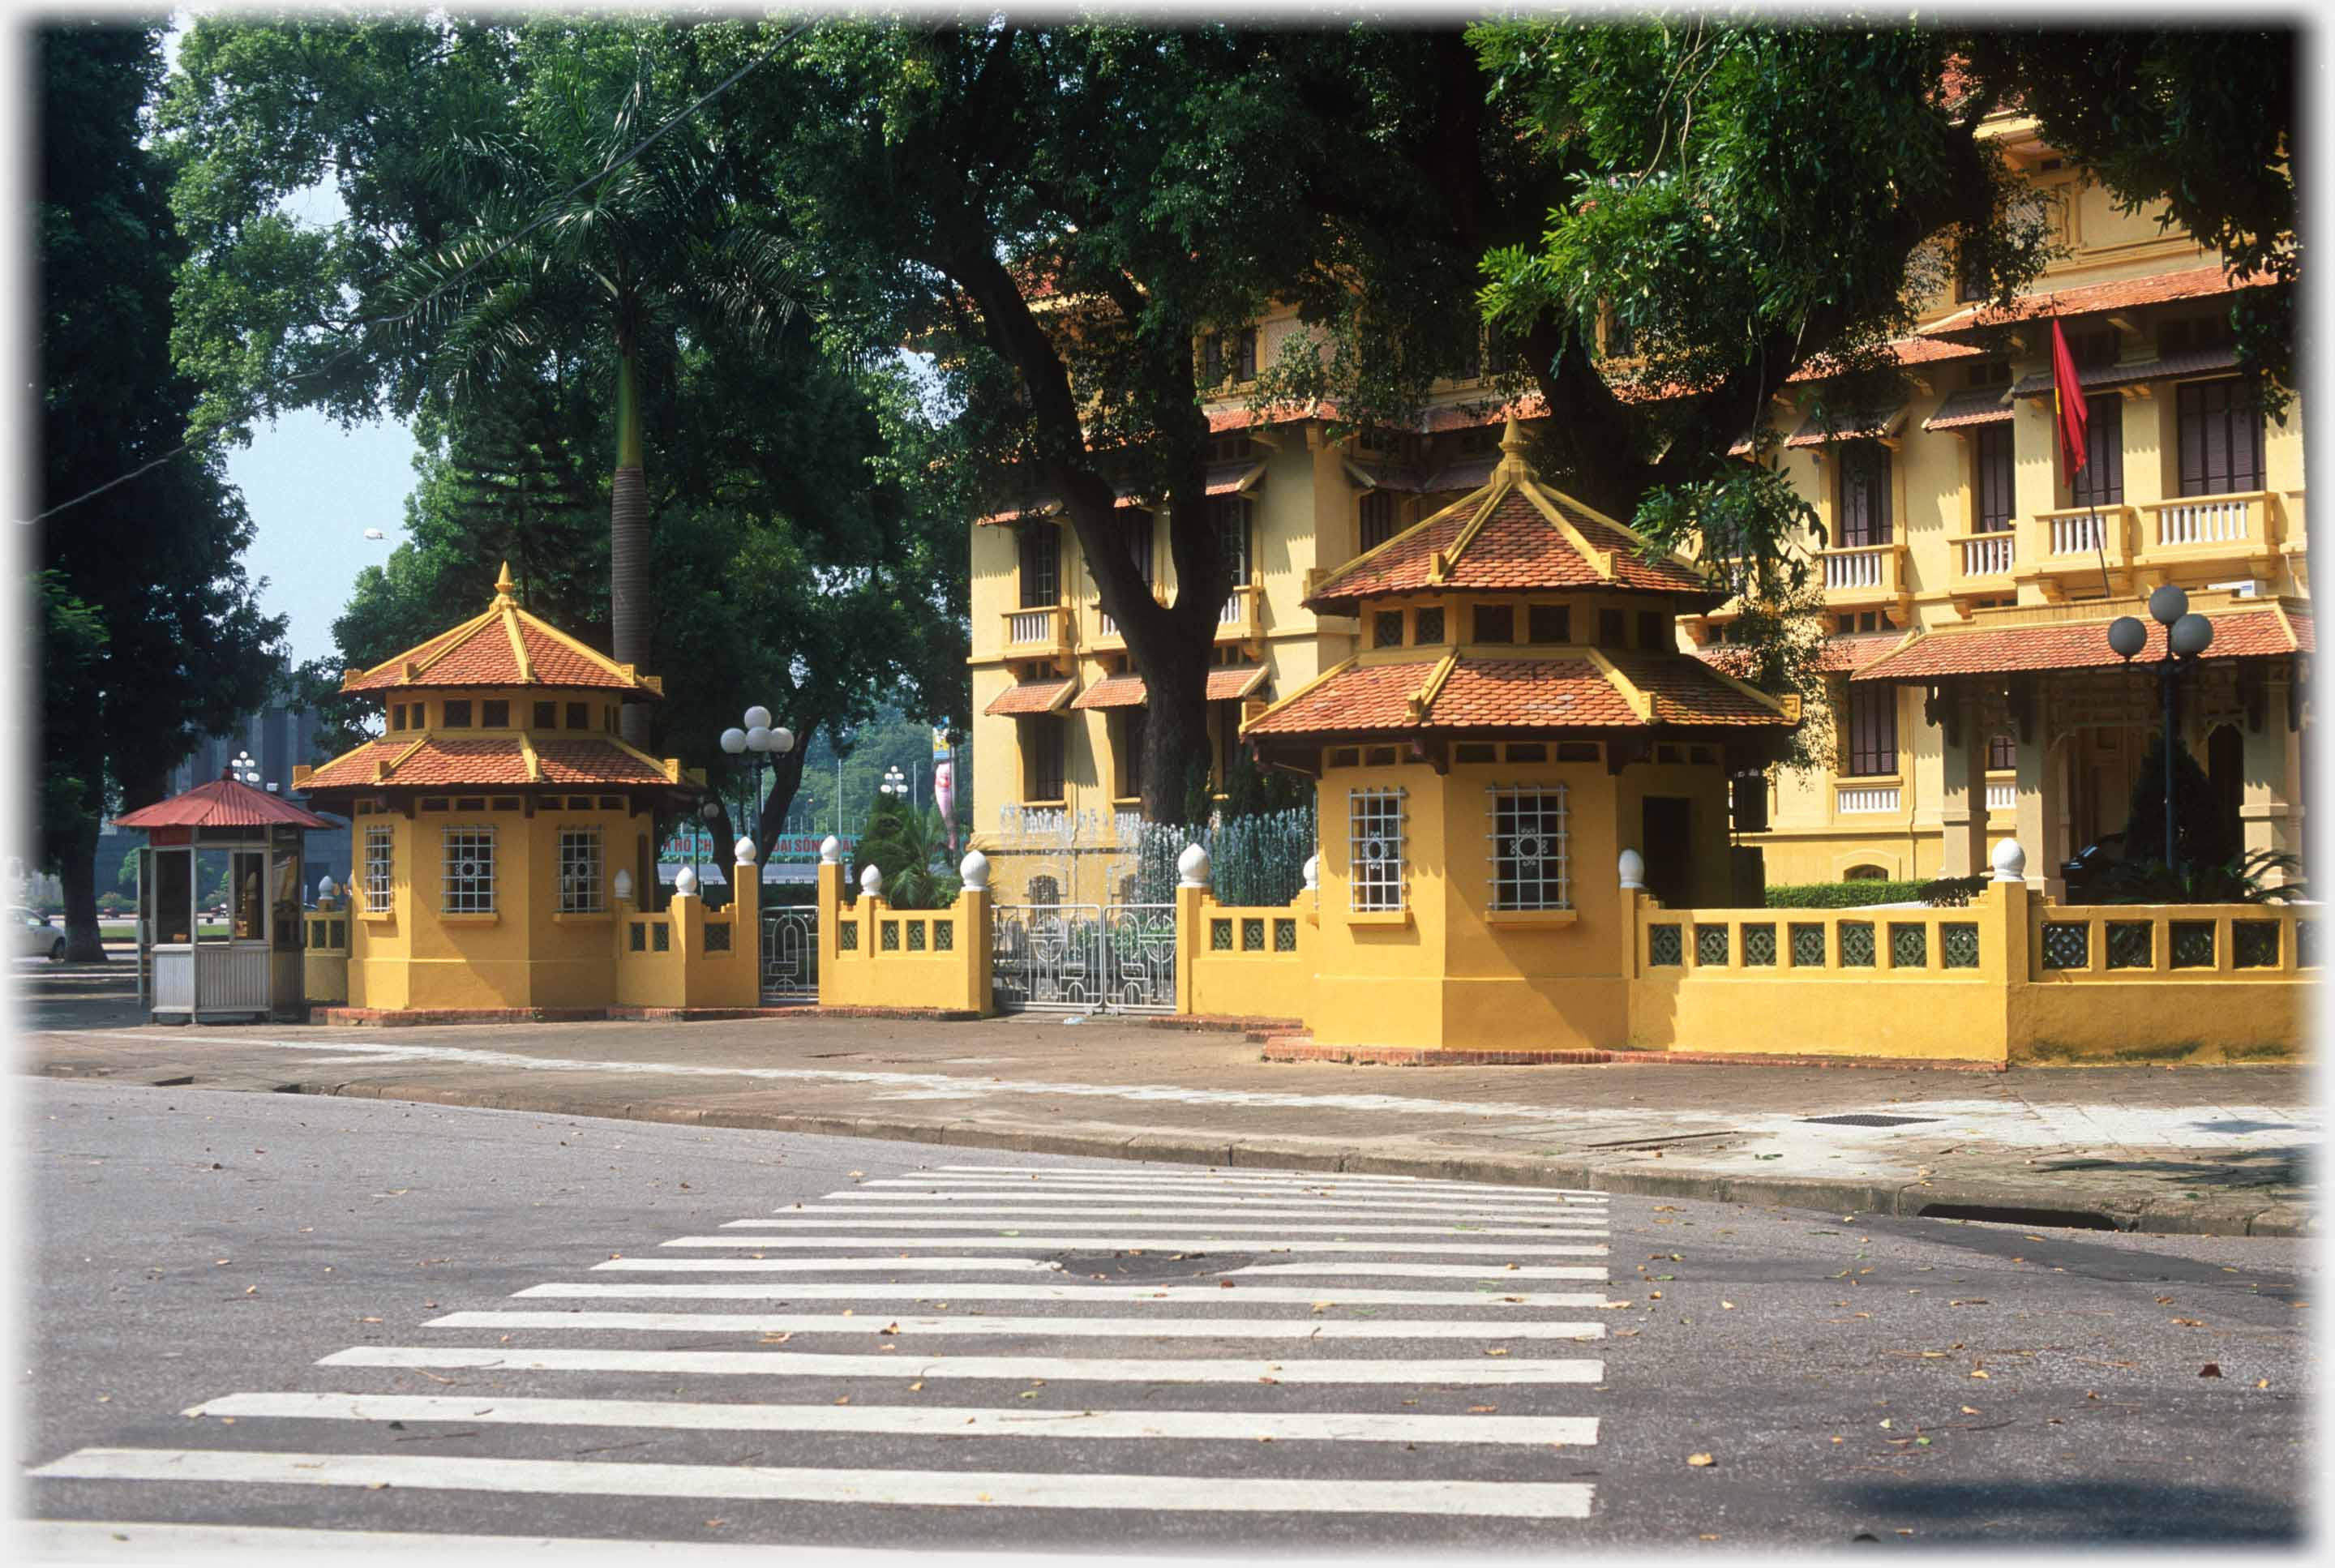 Two ochre gatehouses in front of similar coloured building wtih zebra crossing in foreground.